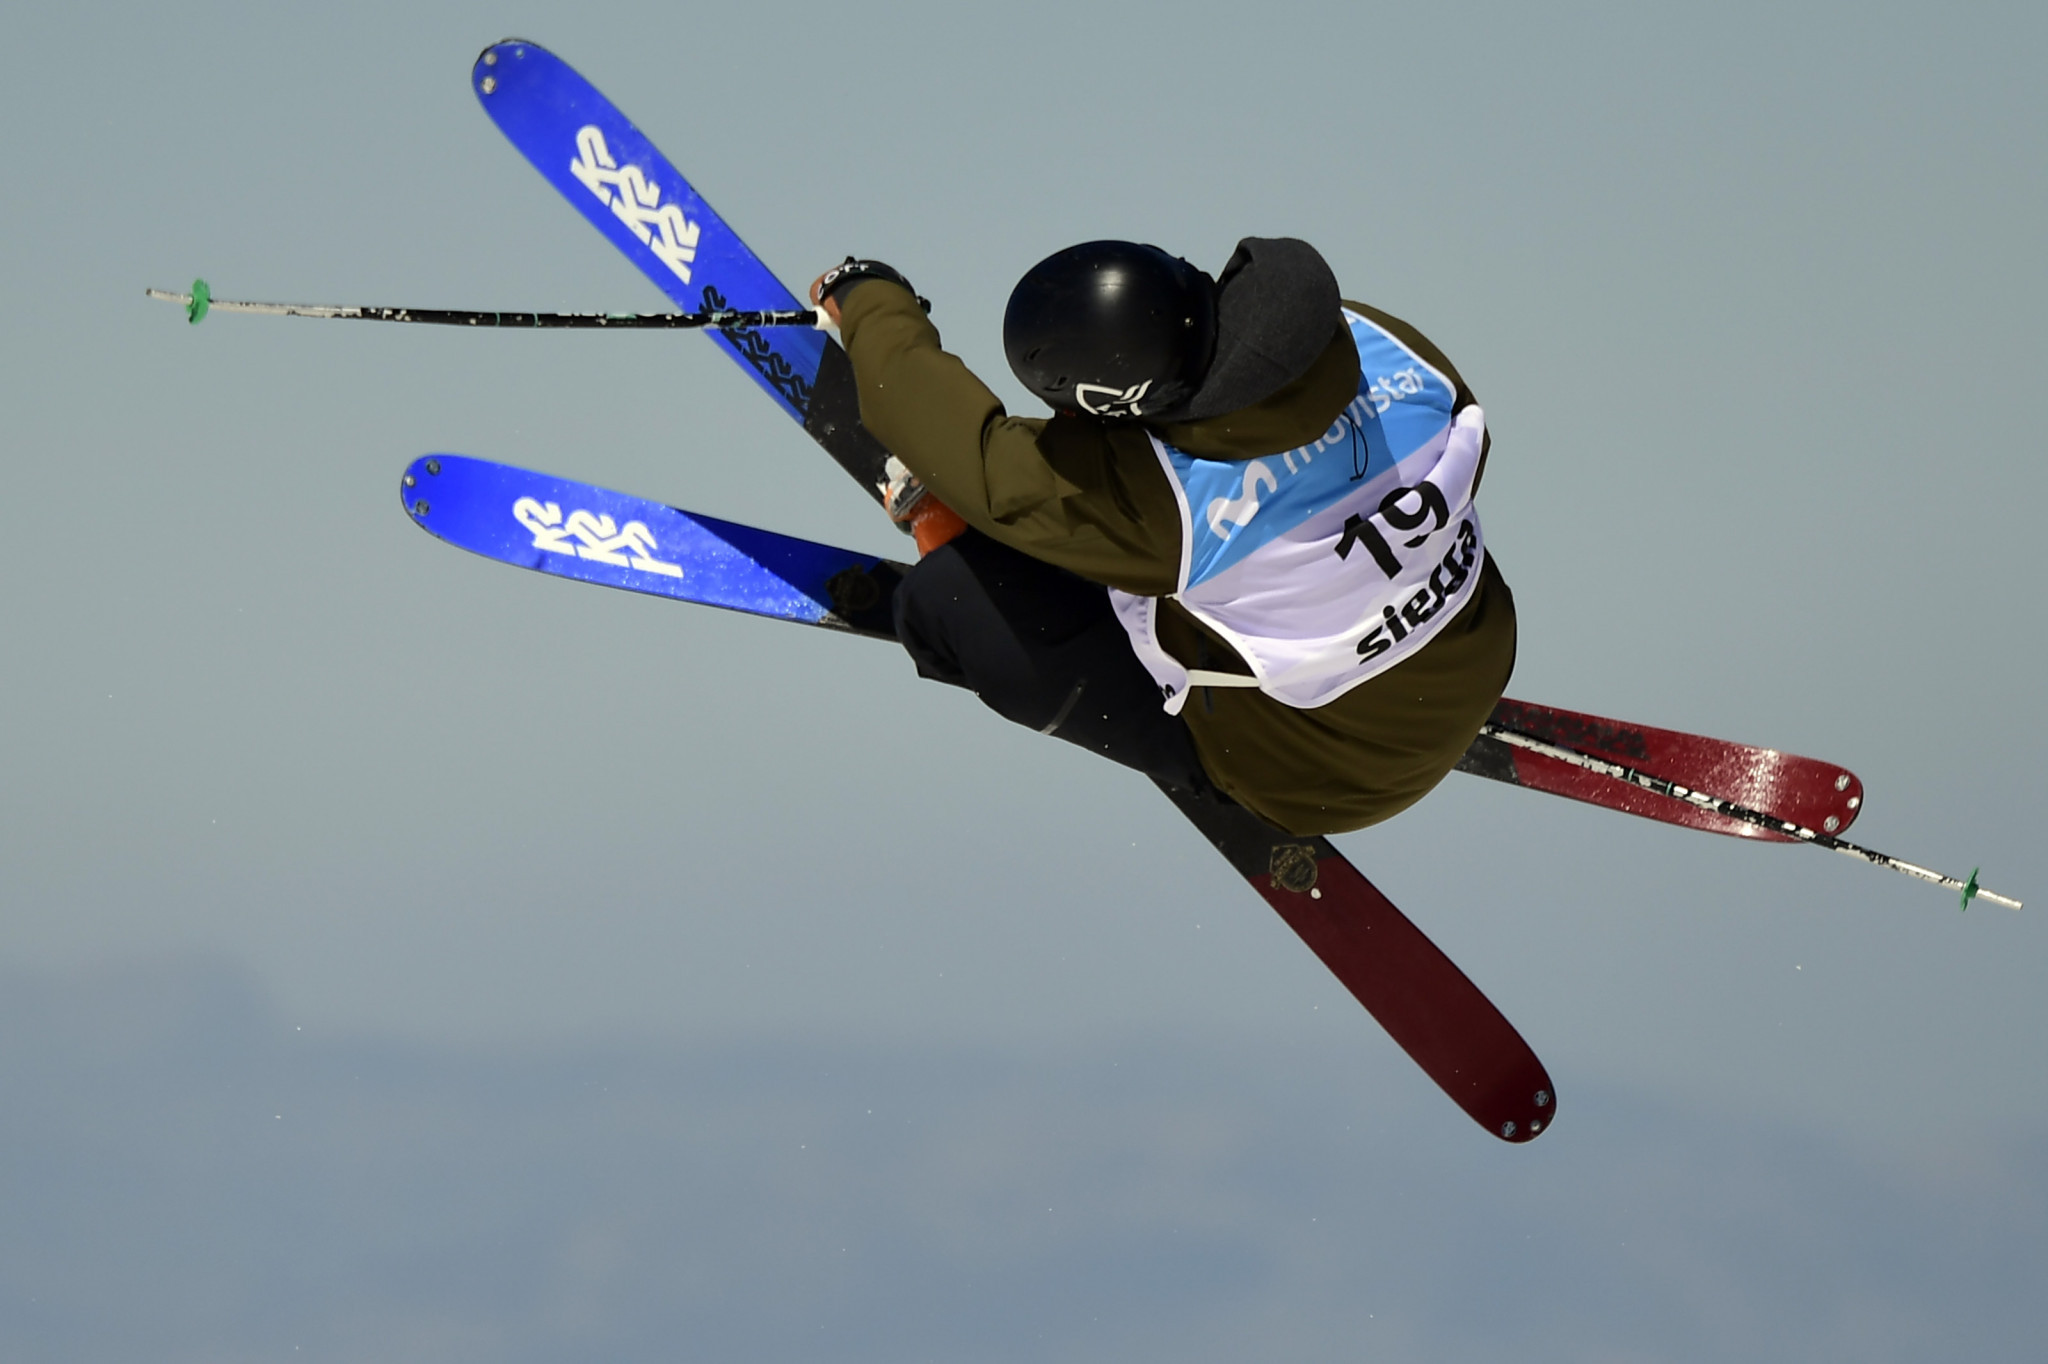 Big Air competition will also take place in Copper Mountain ©Getty Images